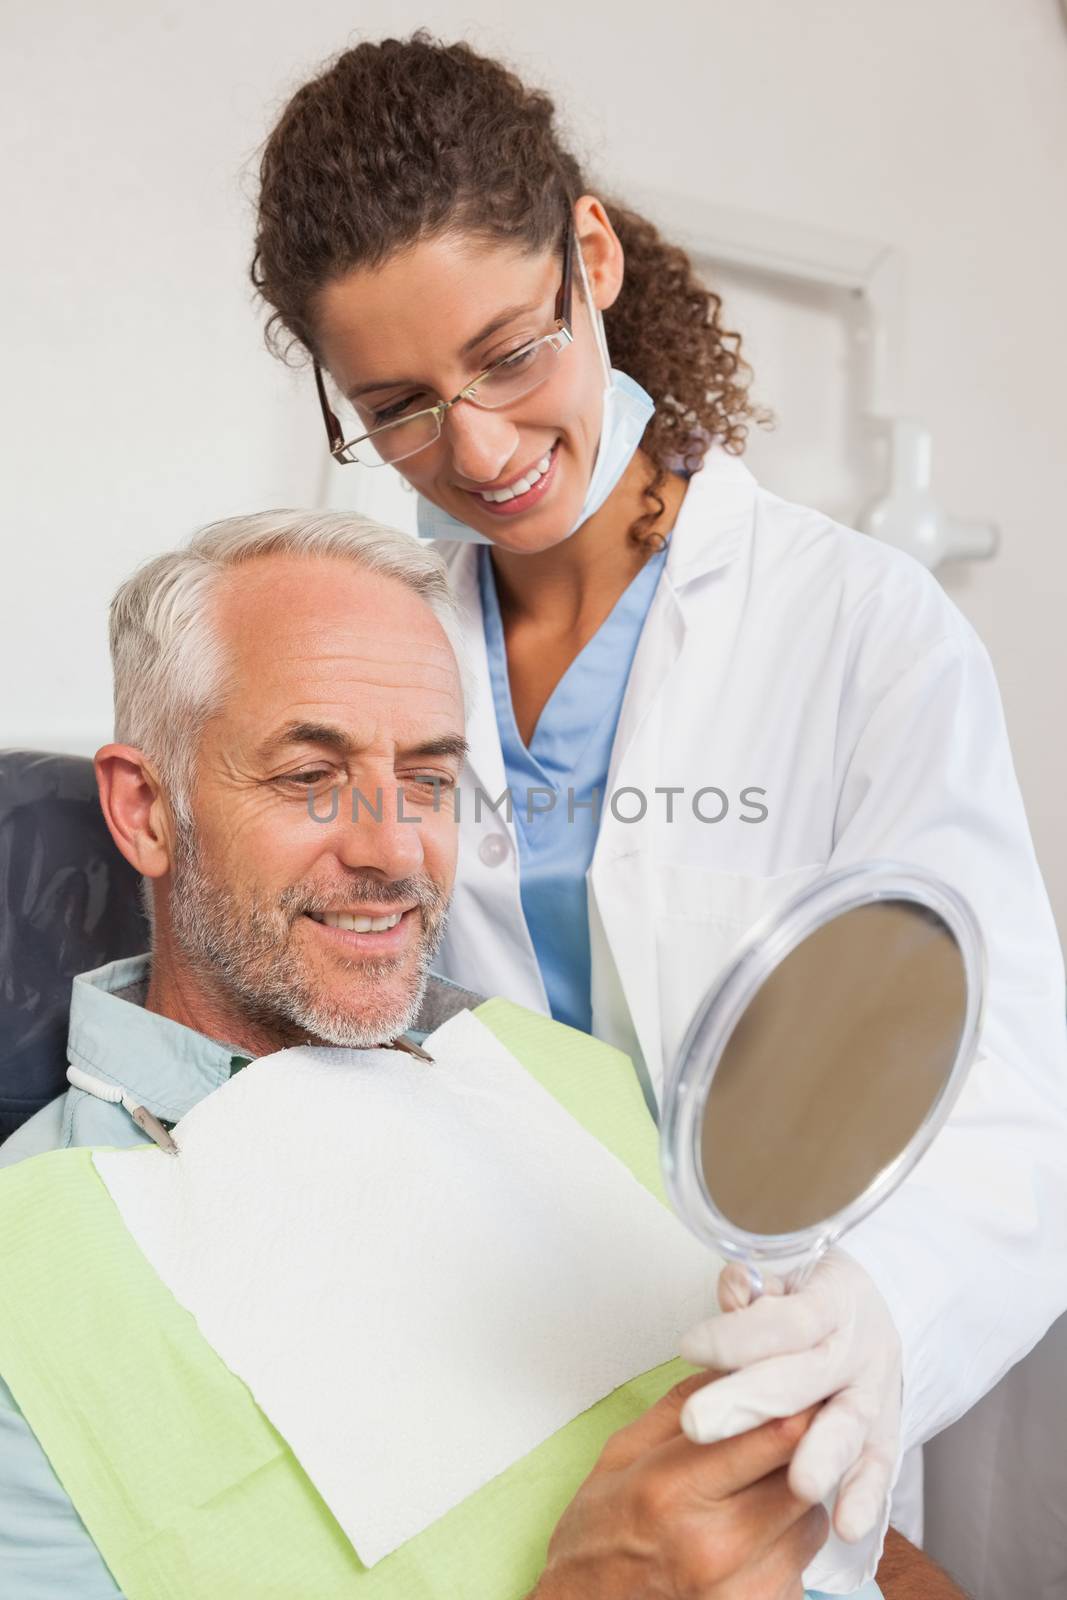 Patient admiring his new smile in the mirror by Wavebreakmedia